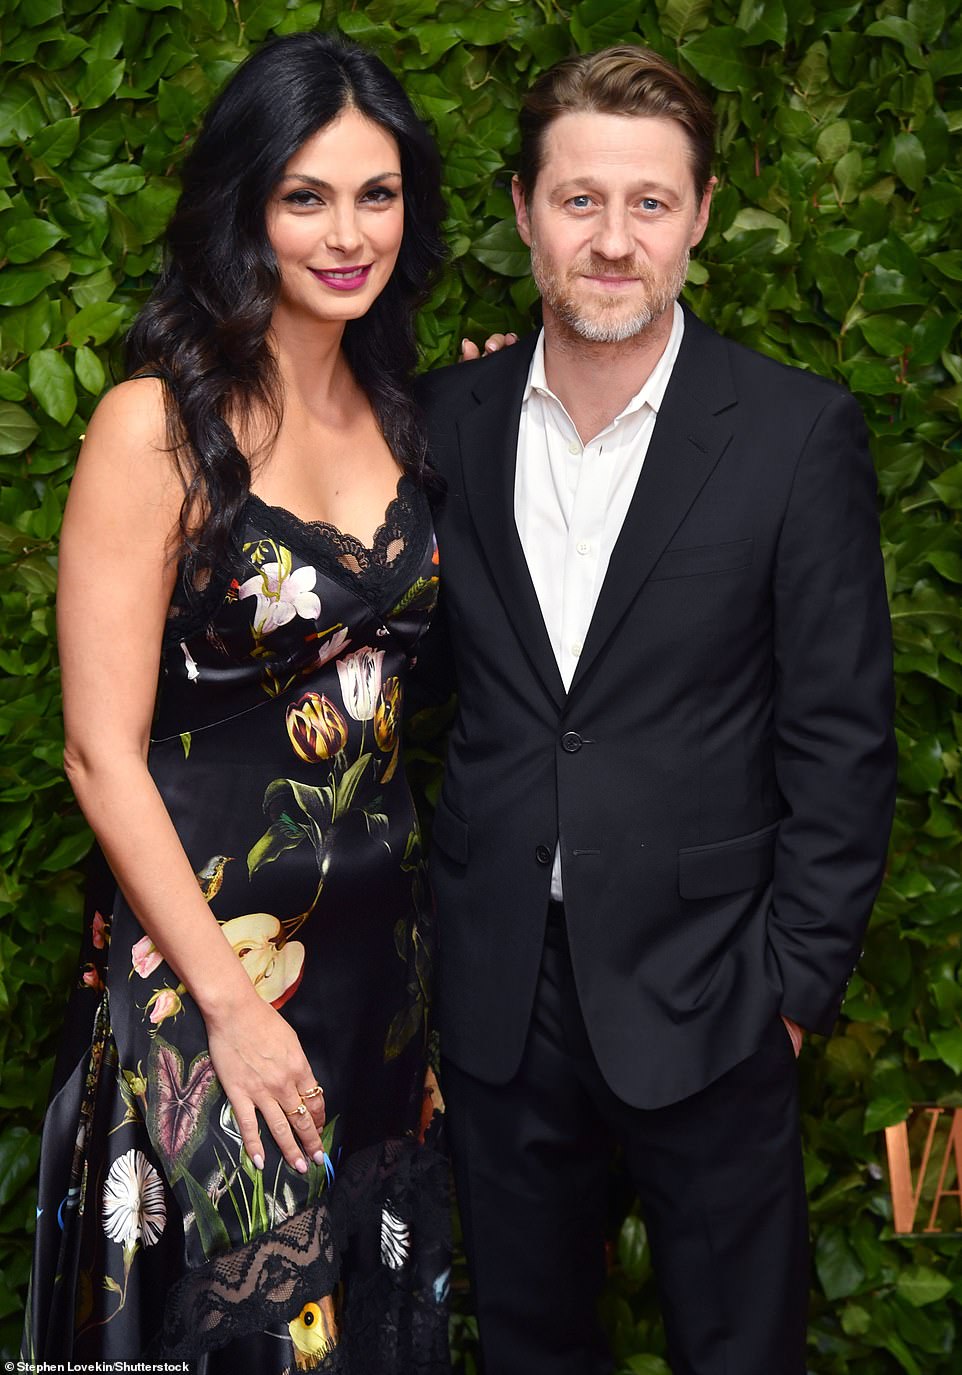 Power couple: She attended with her husband, Ben McKenzie, who is an actor and author